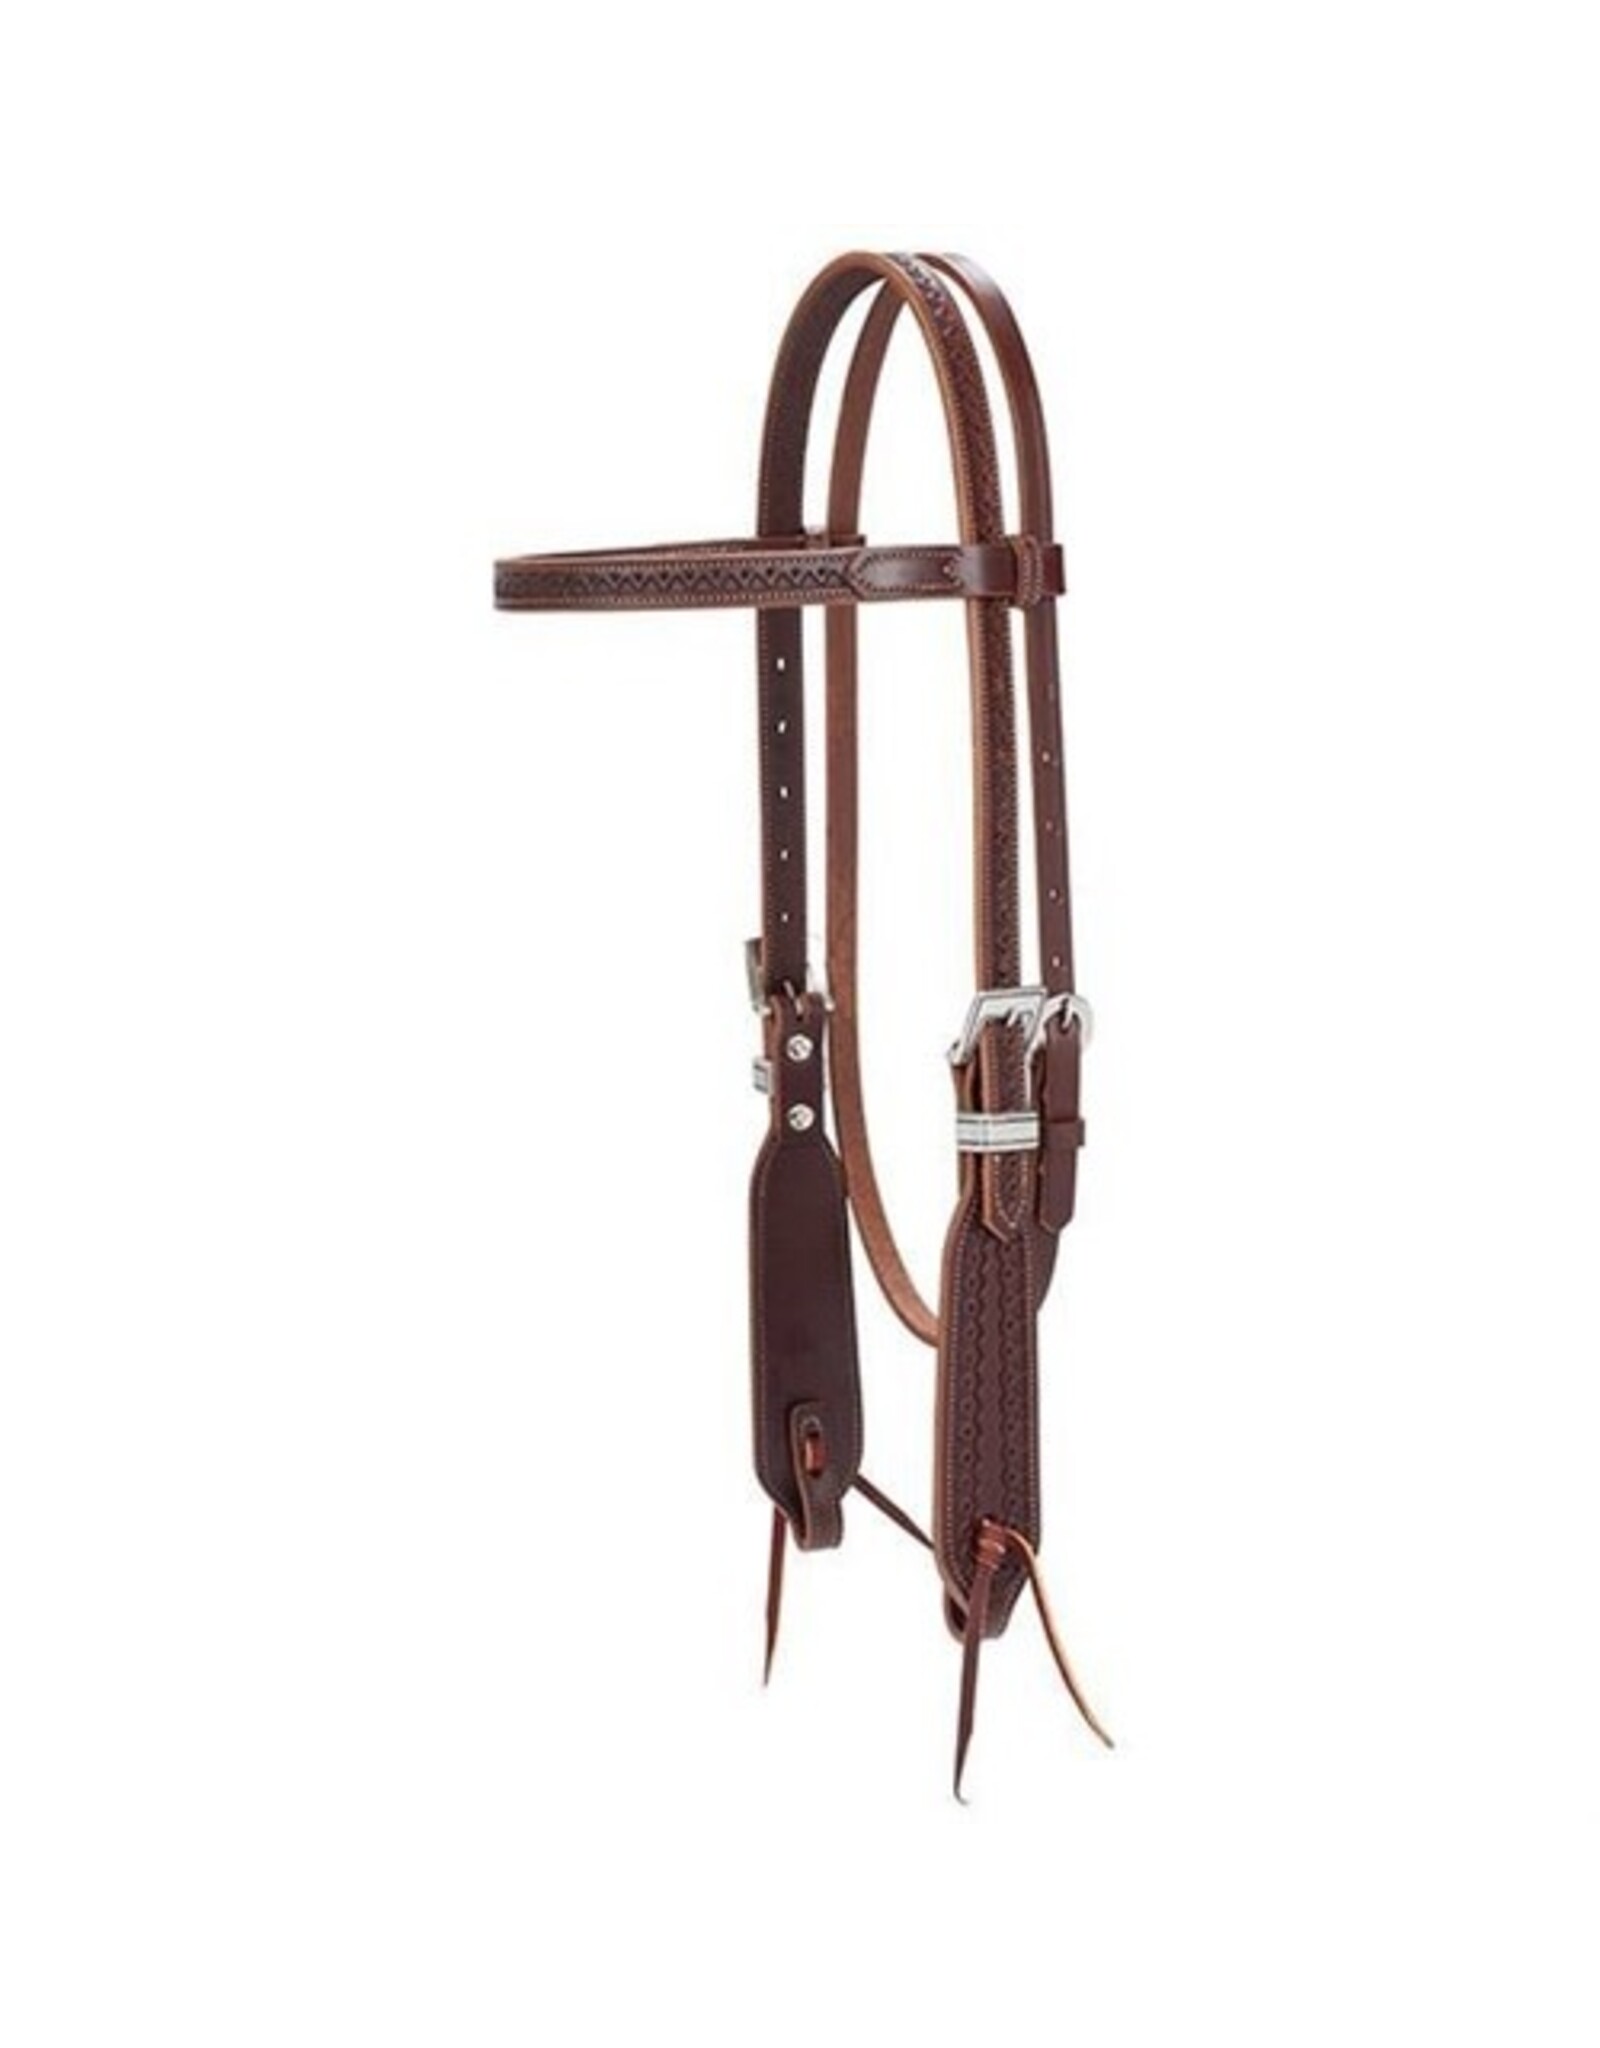 Synergy Hand-Tooled Mayan Headstall  Smooth and Groove Designer Hardware 3/4" - Brow Band - 10017-12-00-04